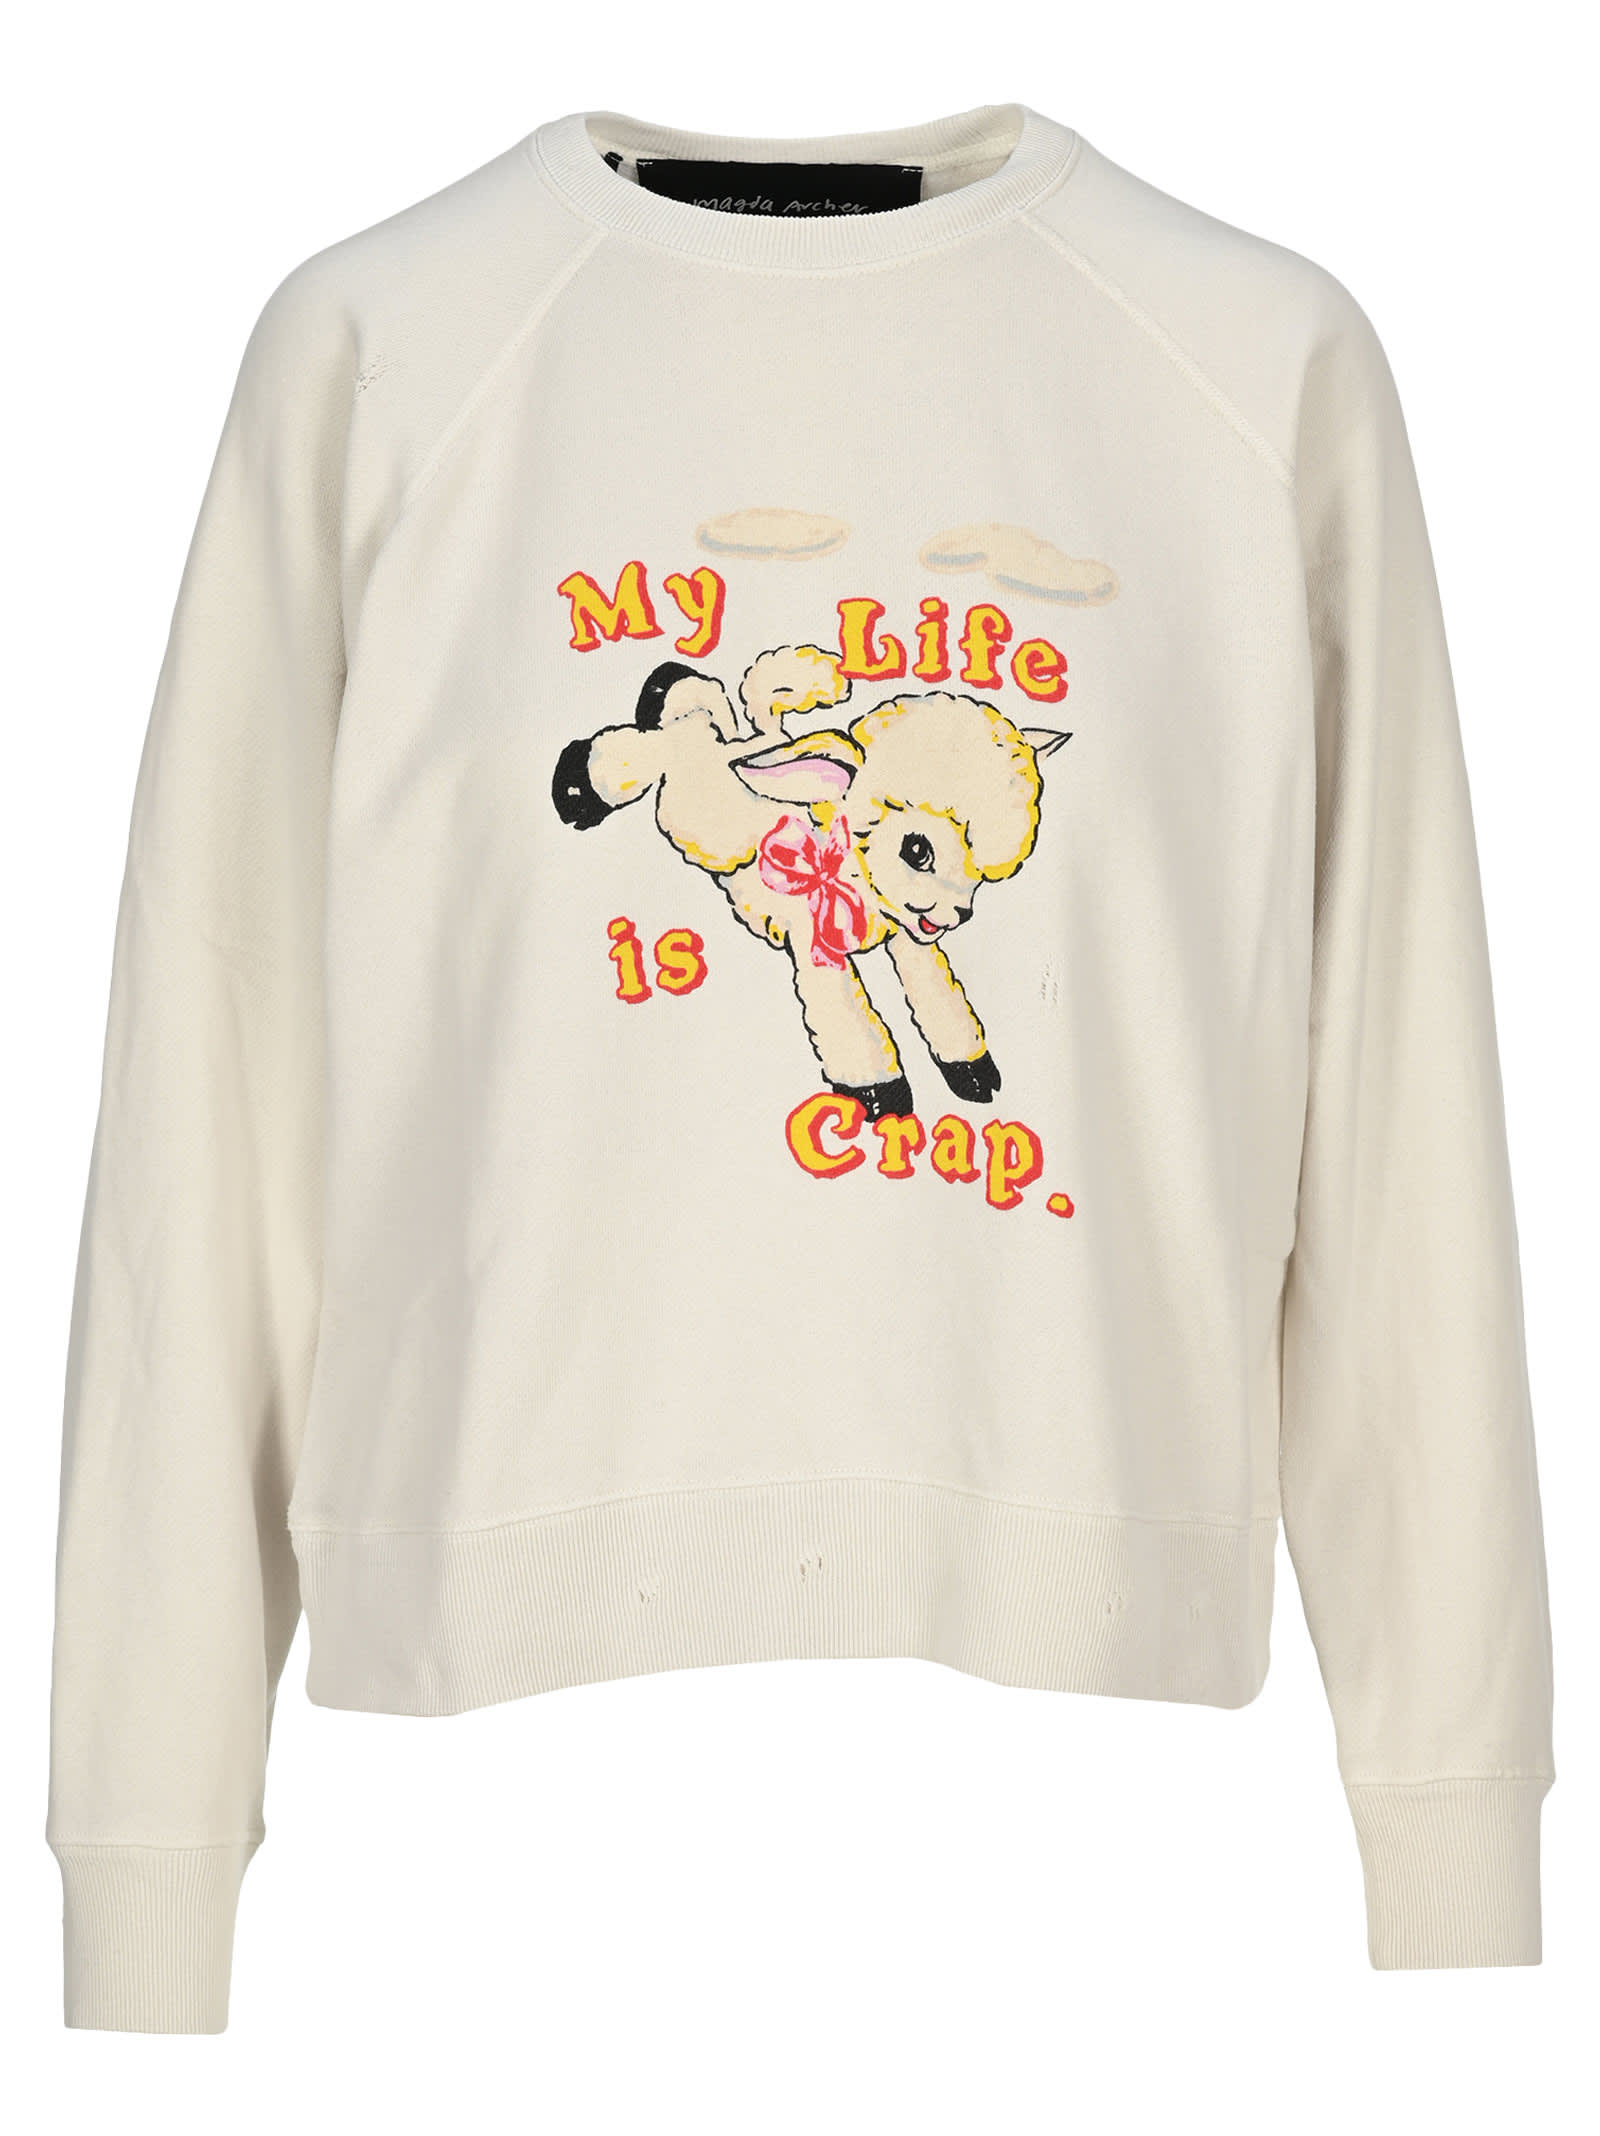 MARC JACOBS MAGDA ARCHER THE COLLABORATION SWEATSHIRT,11204864